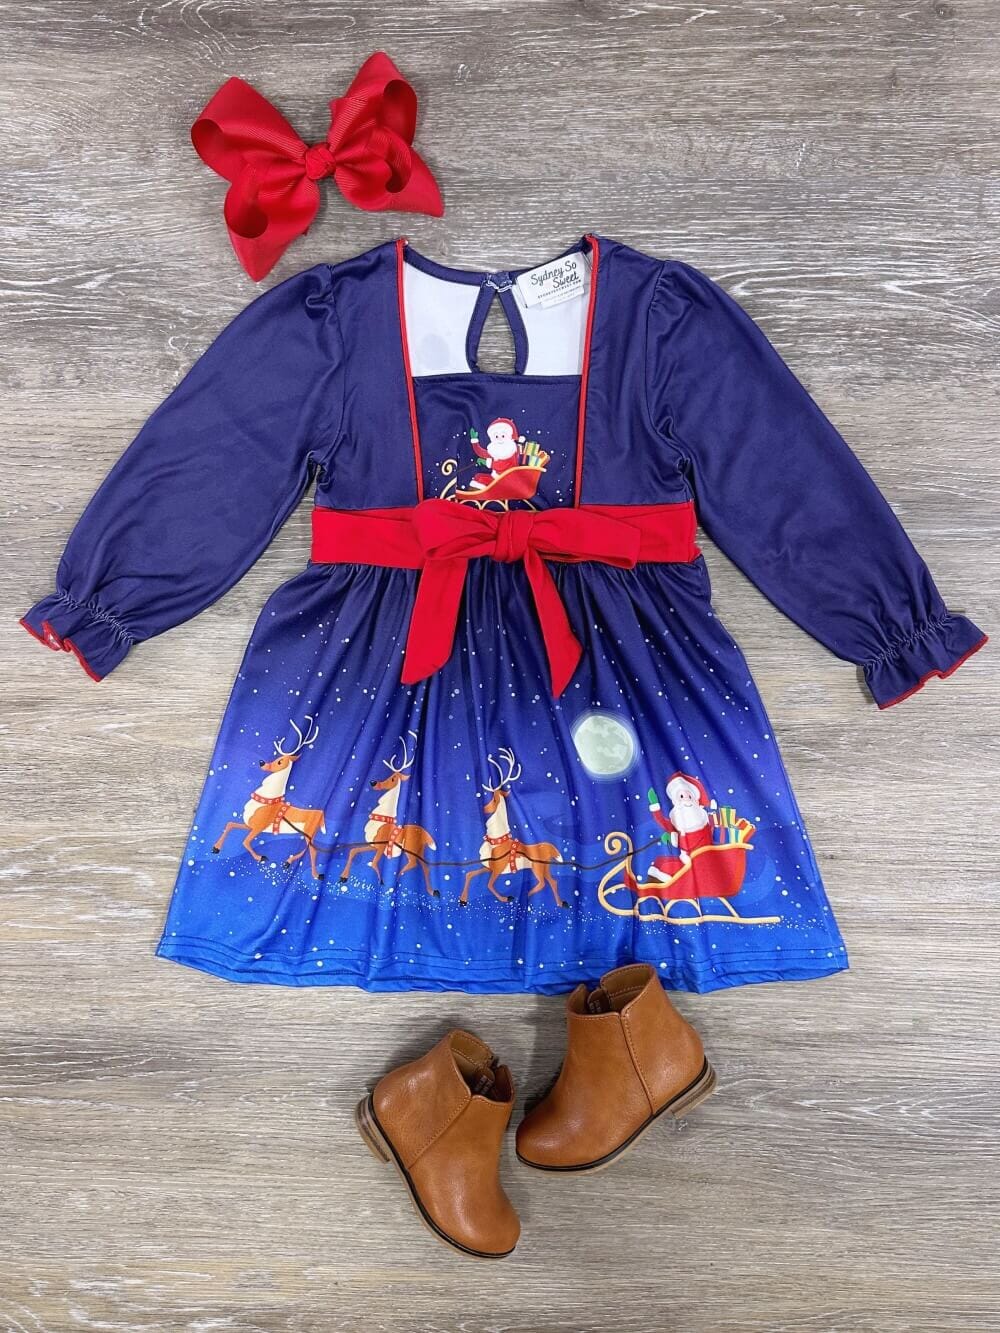 Shop for Little Girls' Christmas Outfits